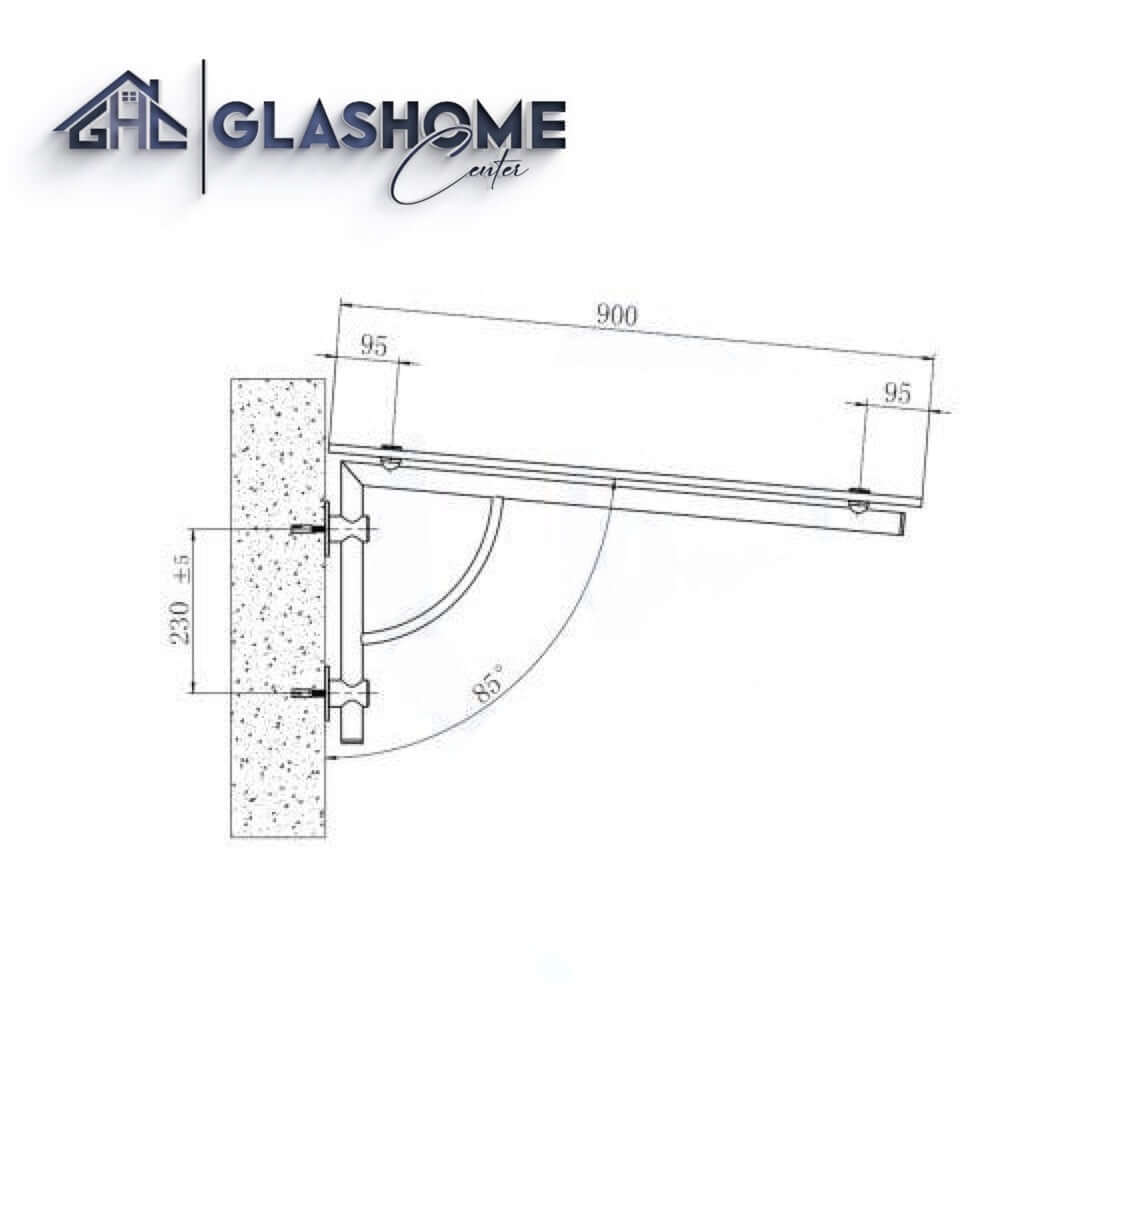 GlasHomeCenter - glass canopy - gray glass - 200x90cm - 13.1mm laminated safety glass - incl. 3 stainless steel brackets variant "Athen"